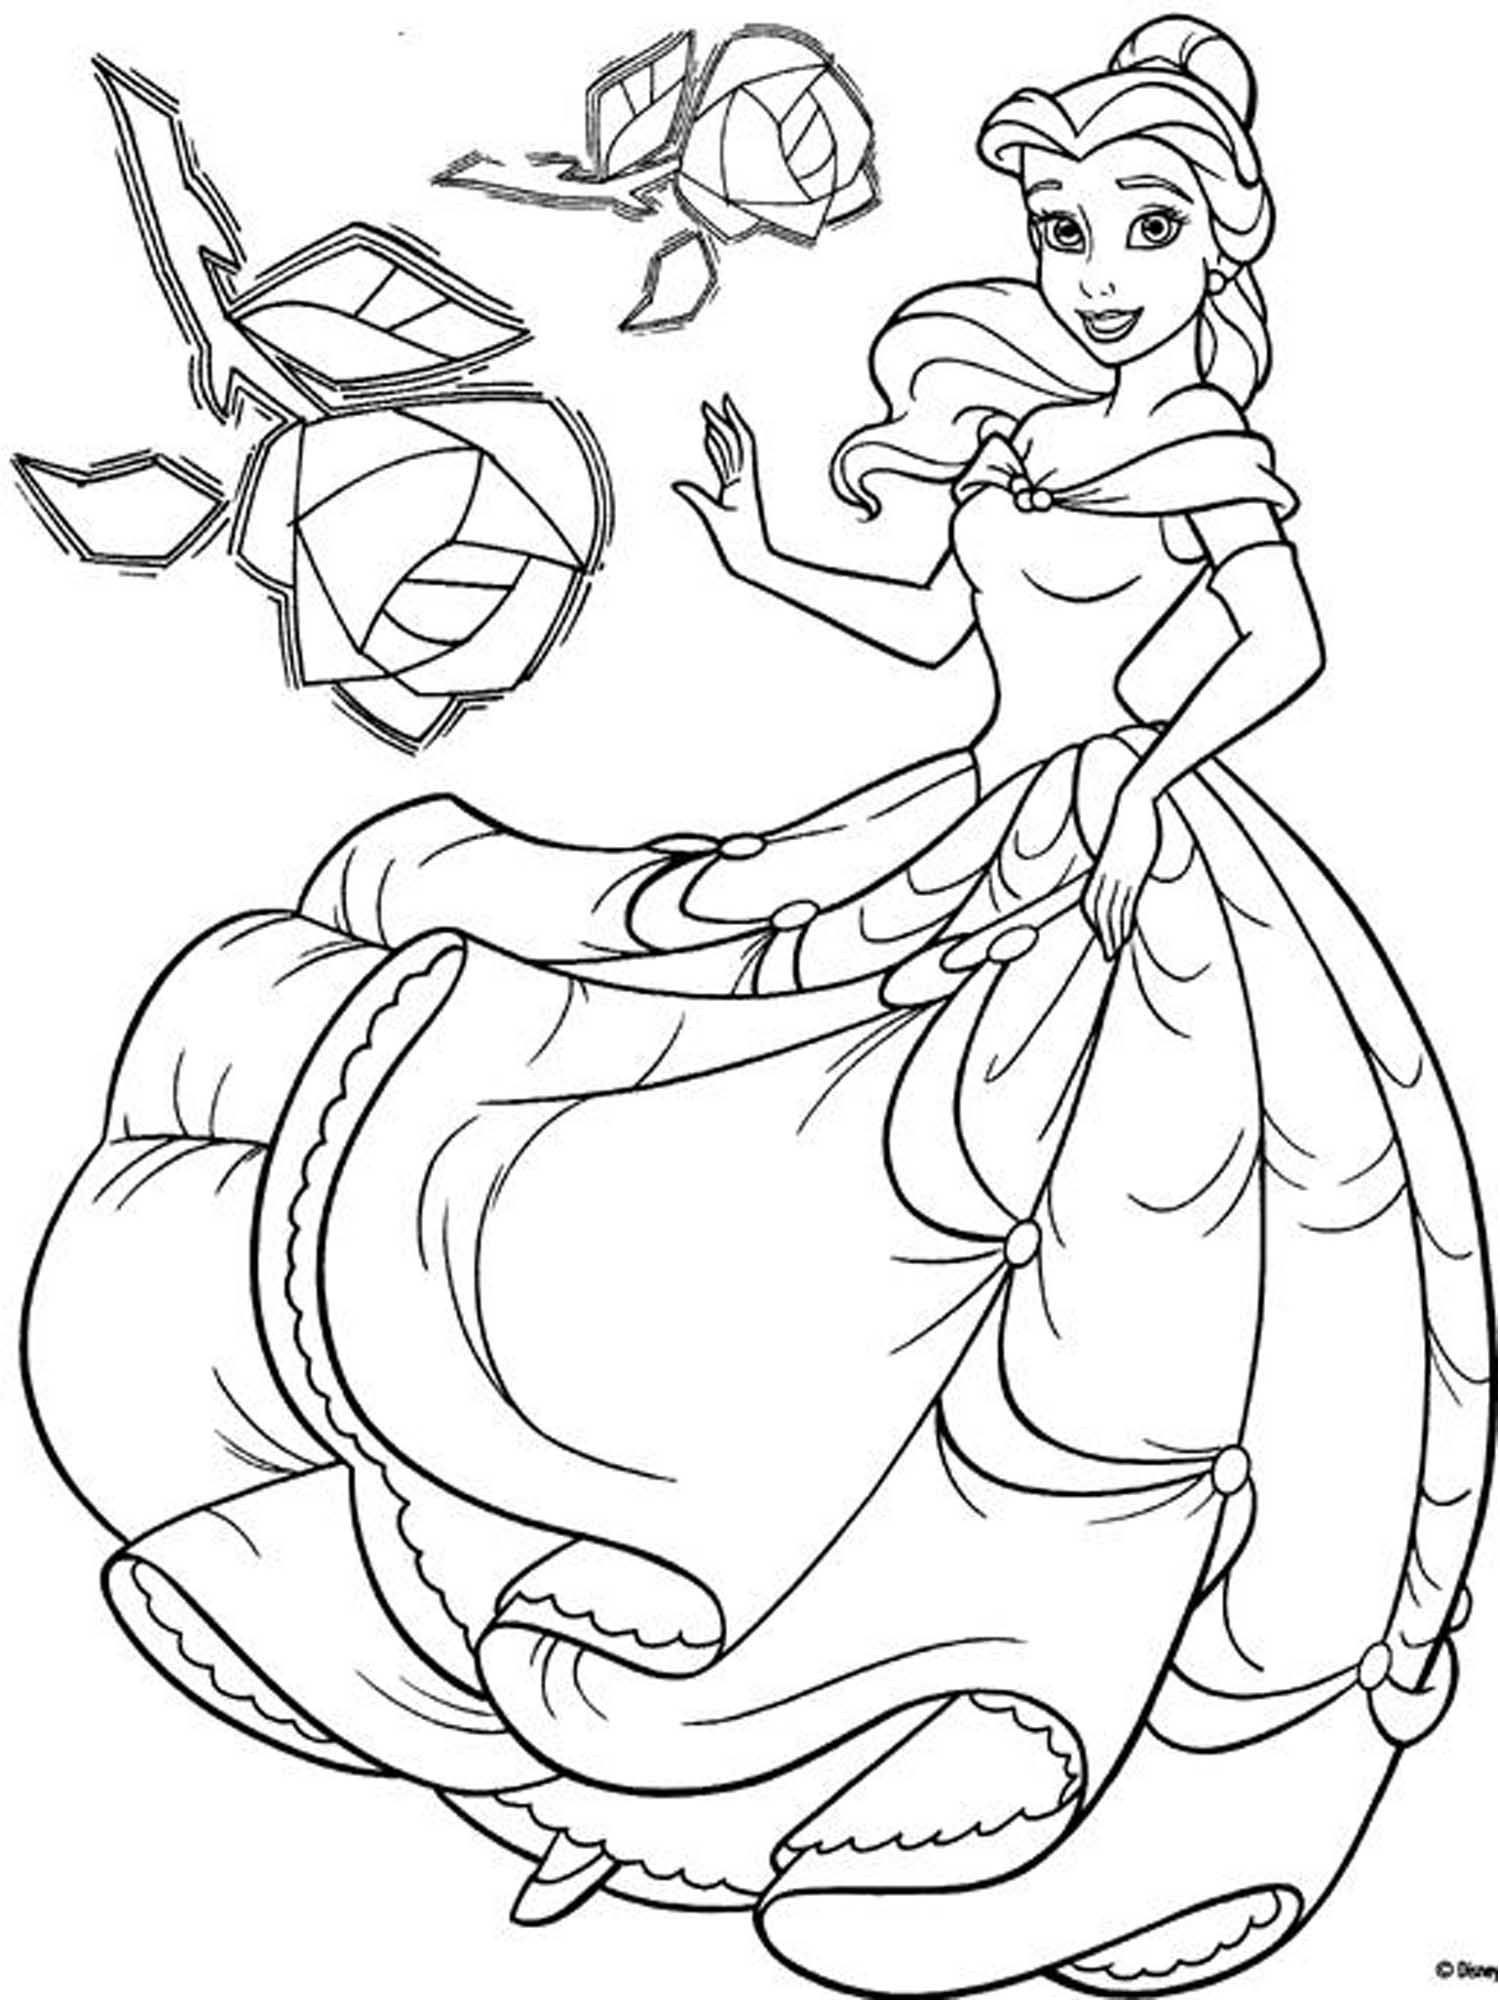 Princess Belle Coloring Pages Games Wallpaper